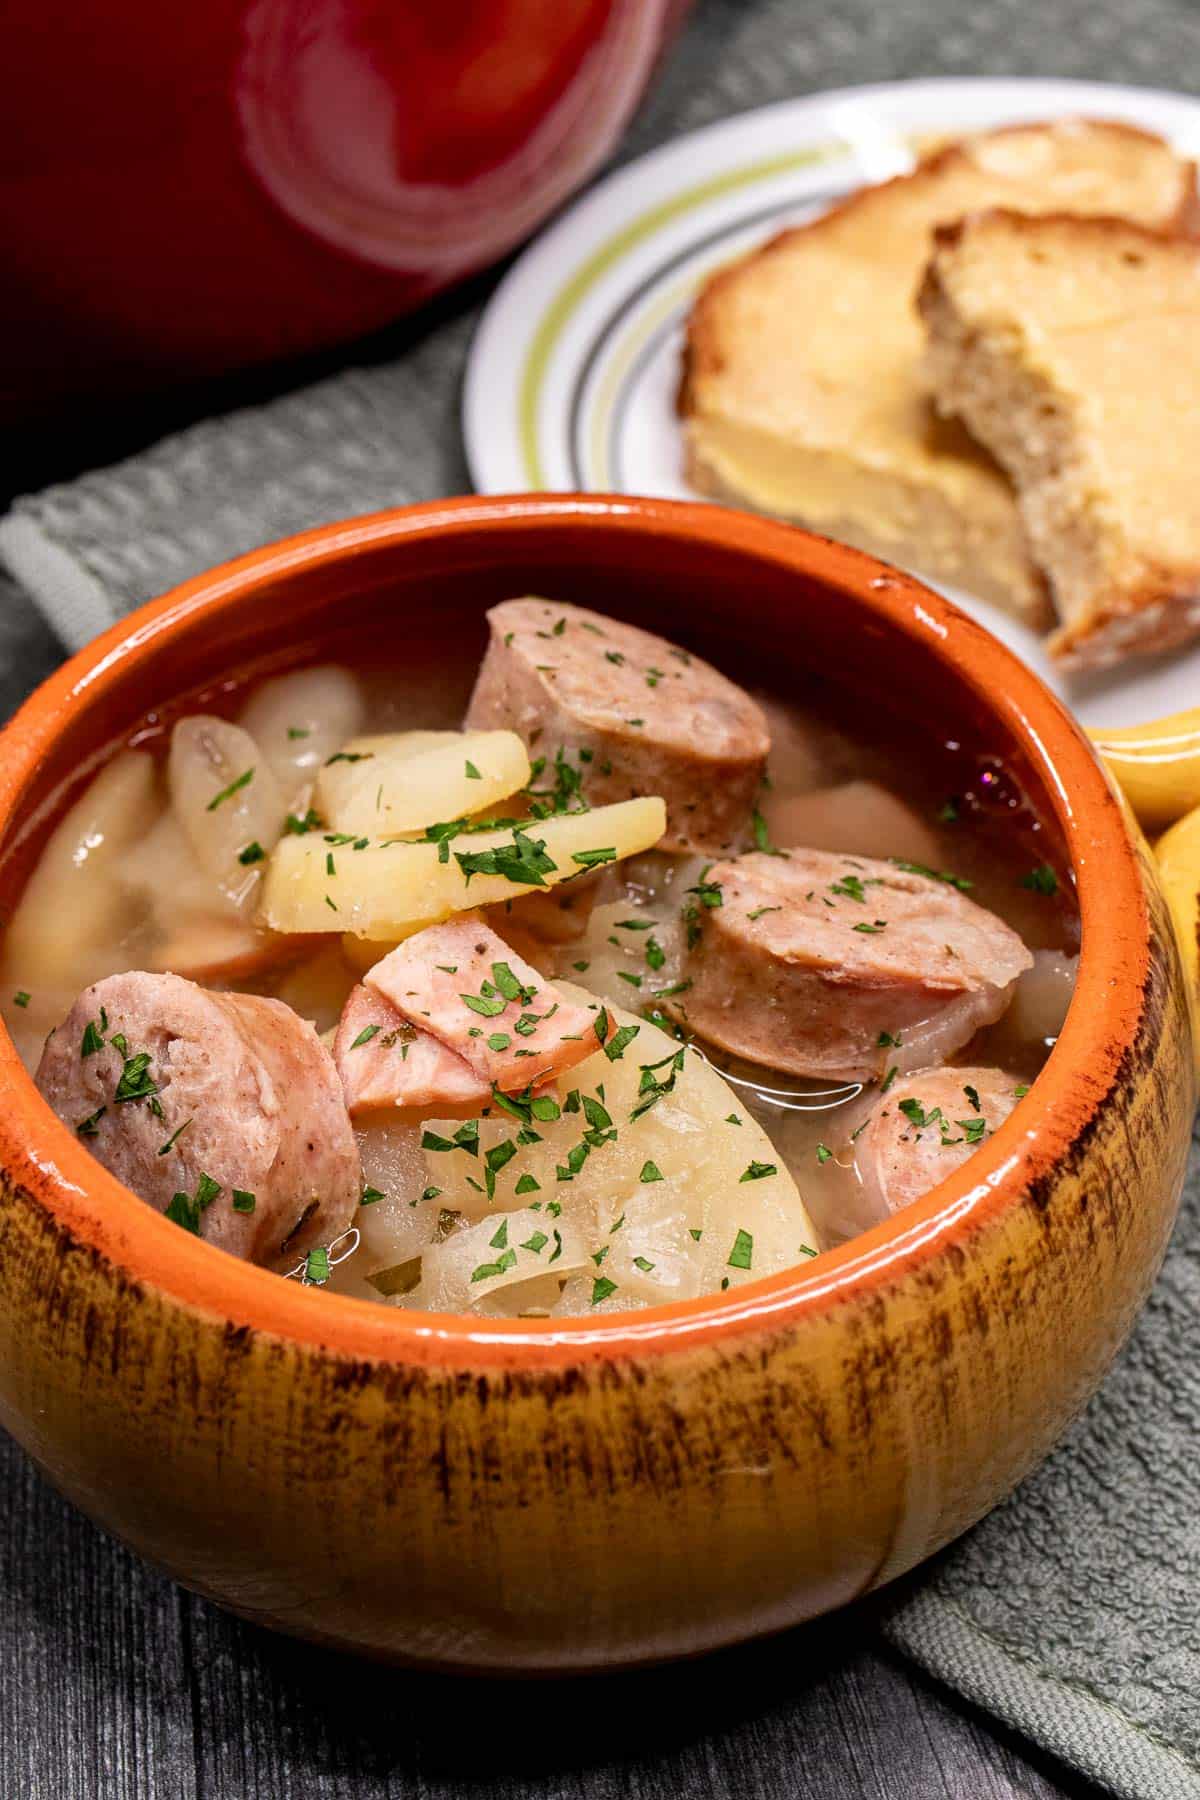 A bowl of Dublin coddle with sliced of Irish soda bread on a plate behind it.